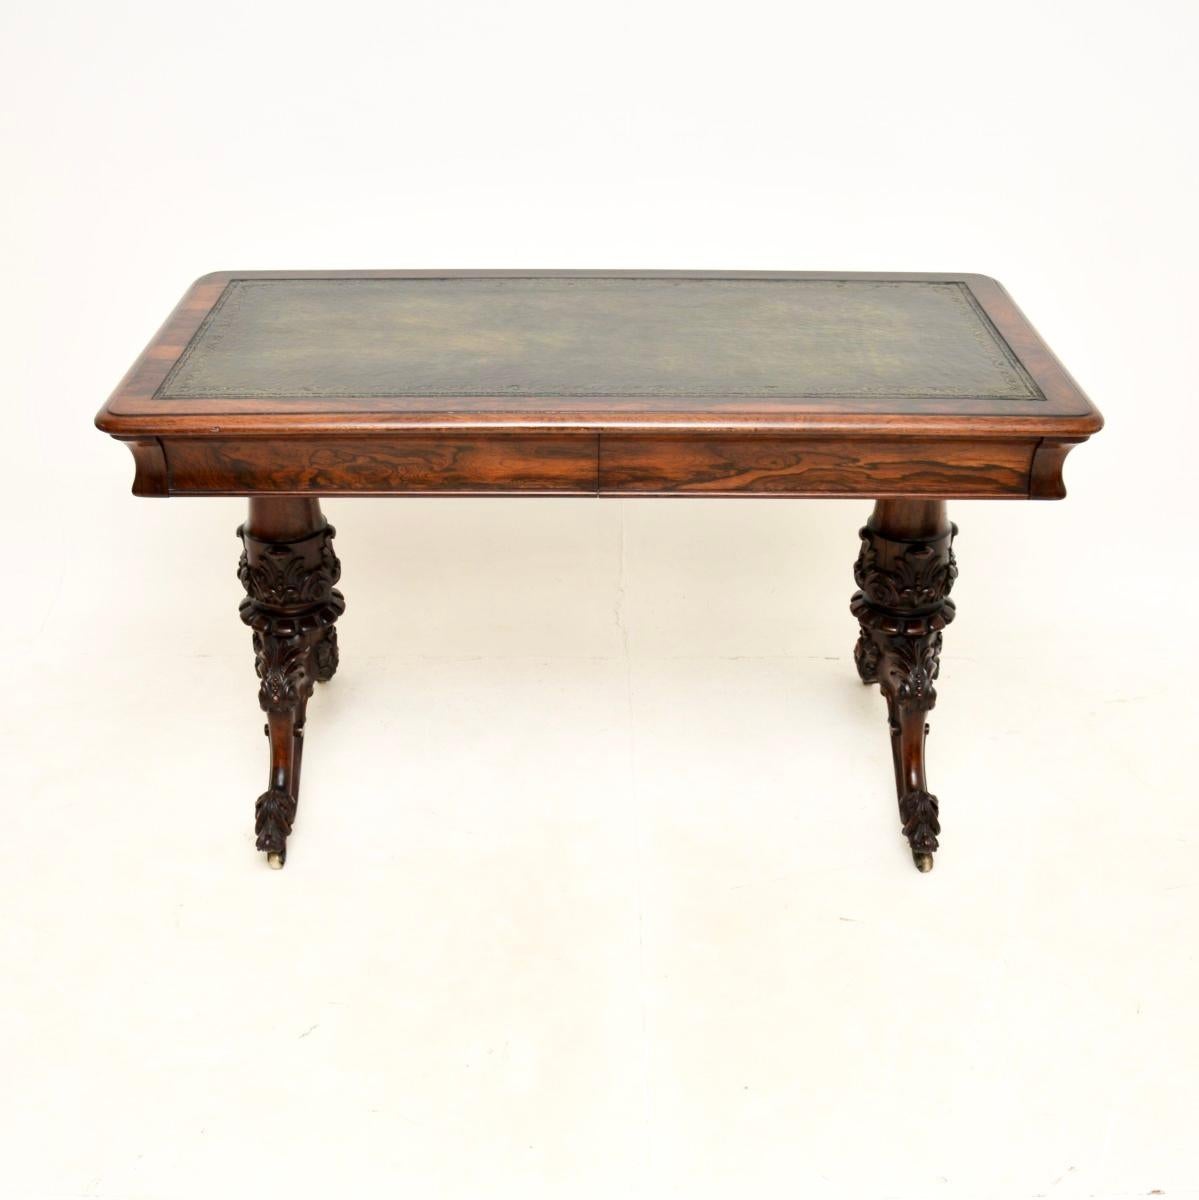 An outstanding antique William IV writing table / desk. This was made in England, it dates from around the 1830-1840 period.

It is of the utmost quality, this stands on bold legs with absolutely stunning carving and brass casters. The top has